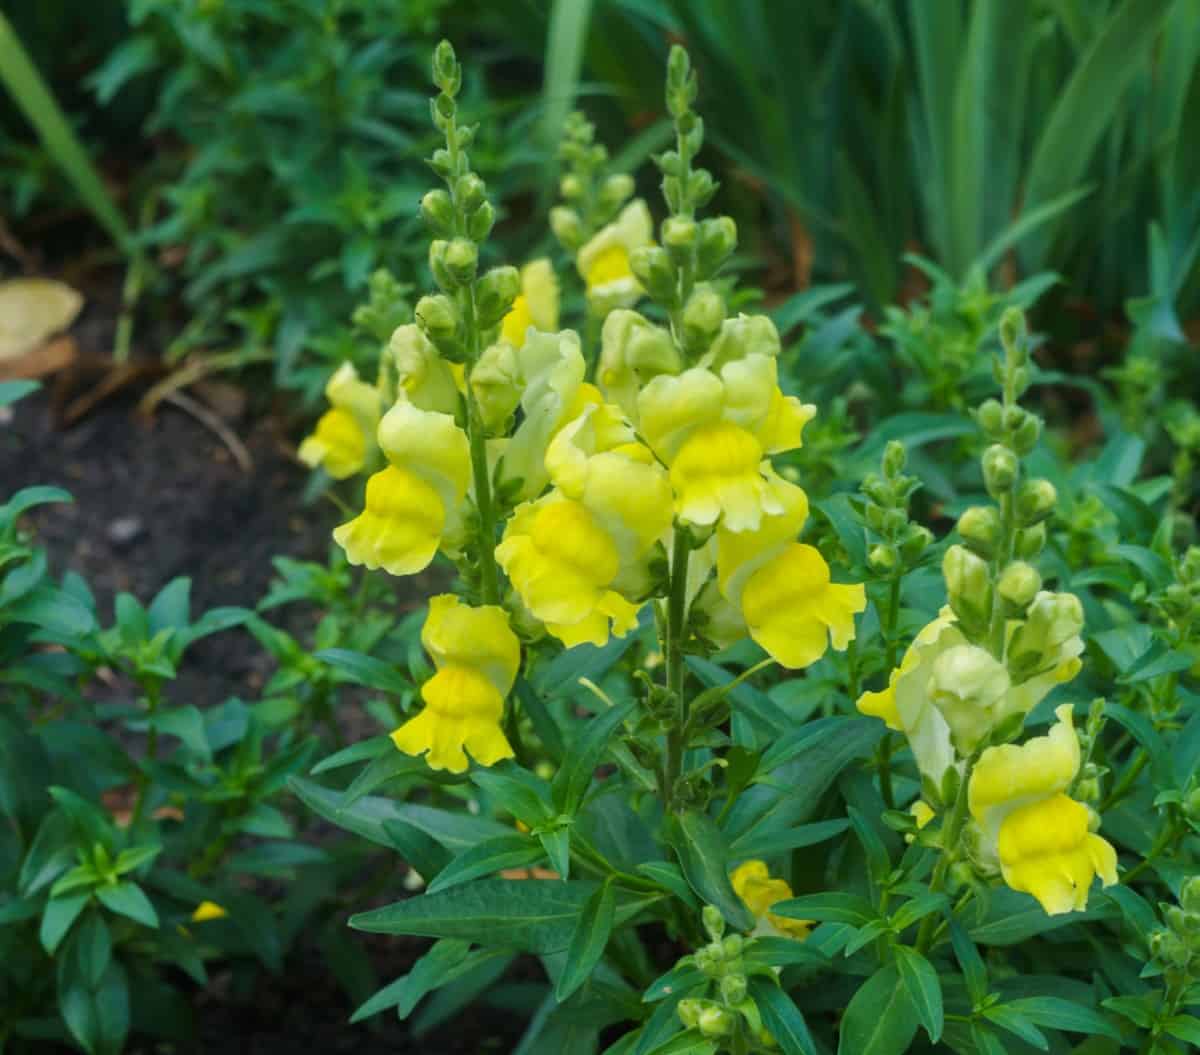 Snapdragons are low-maintenance flowers.